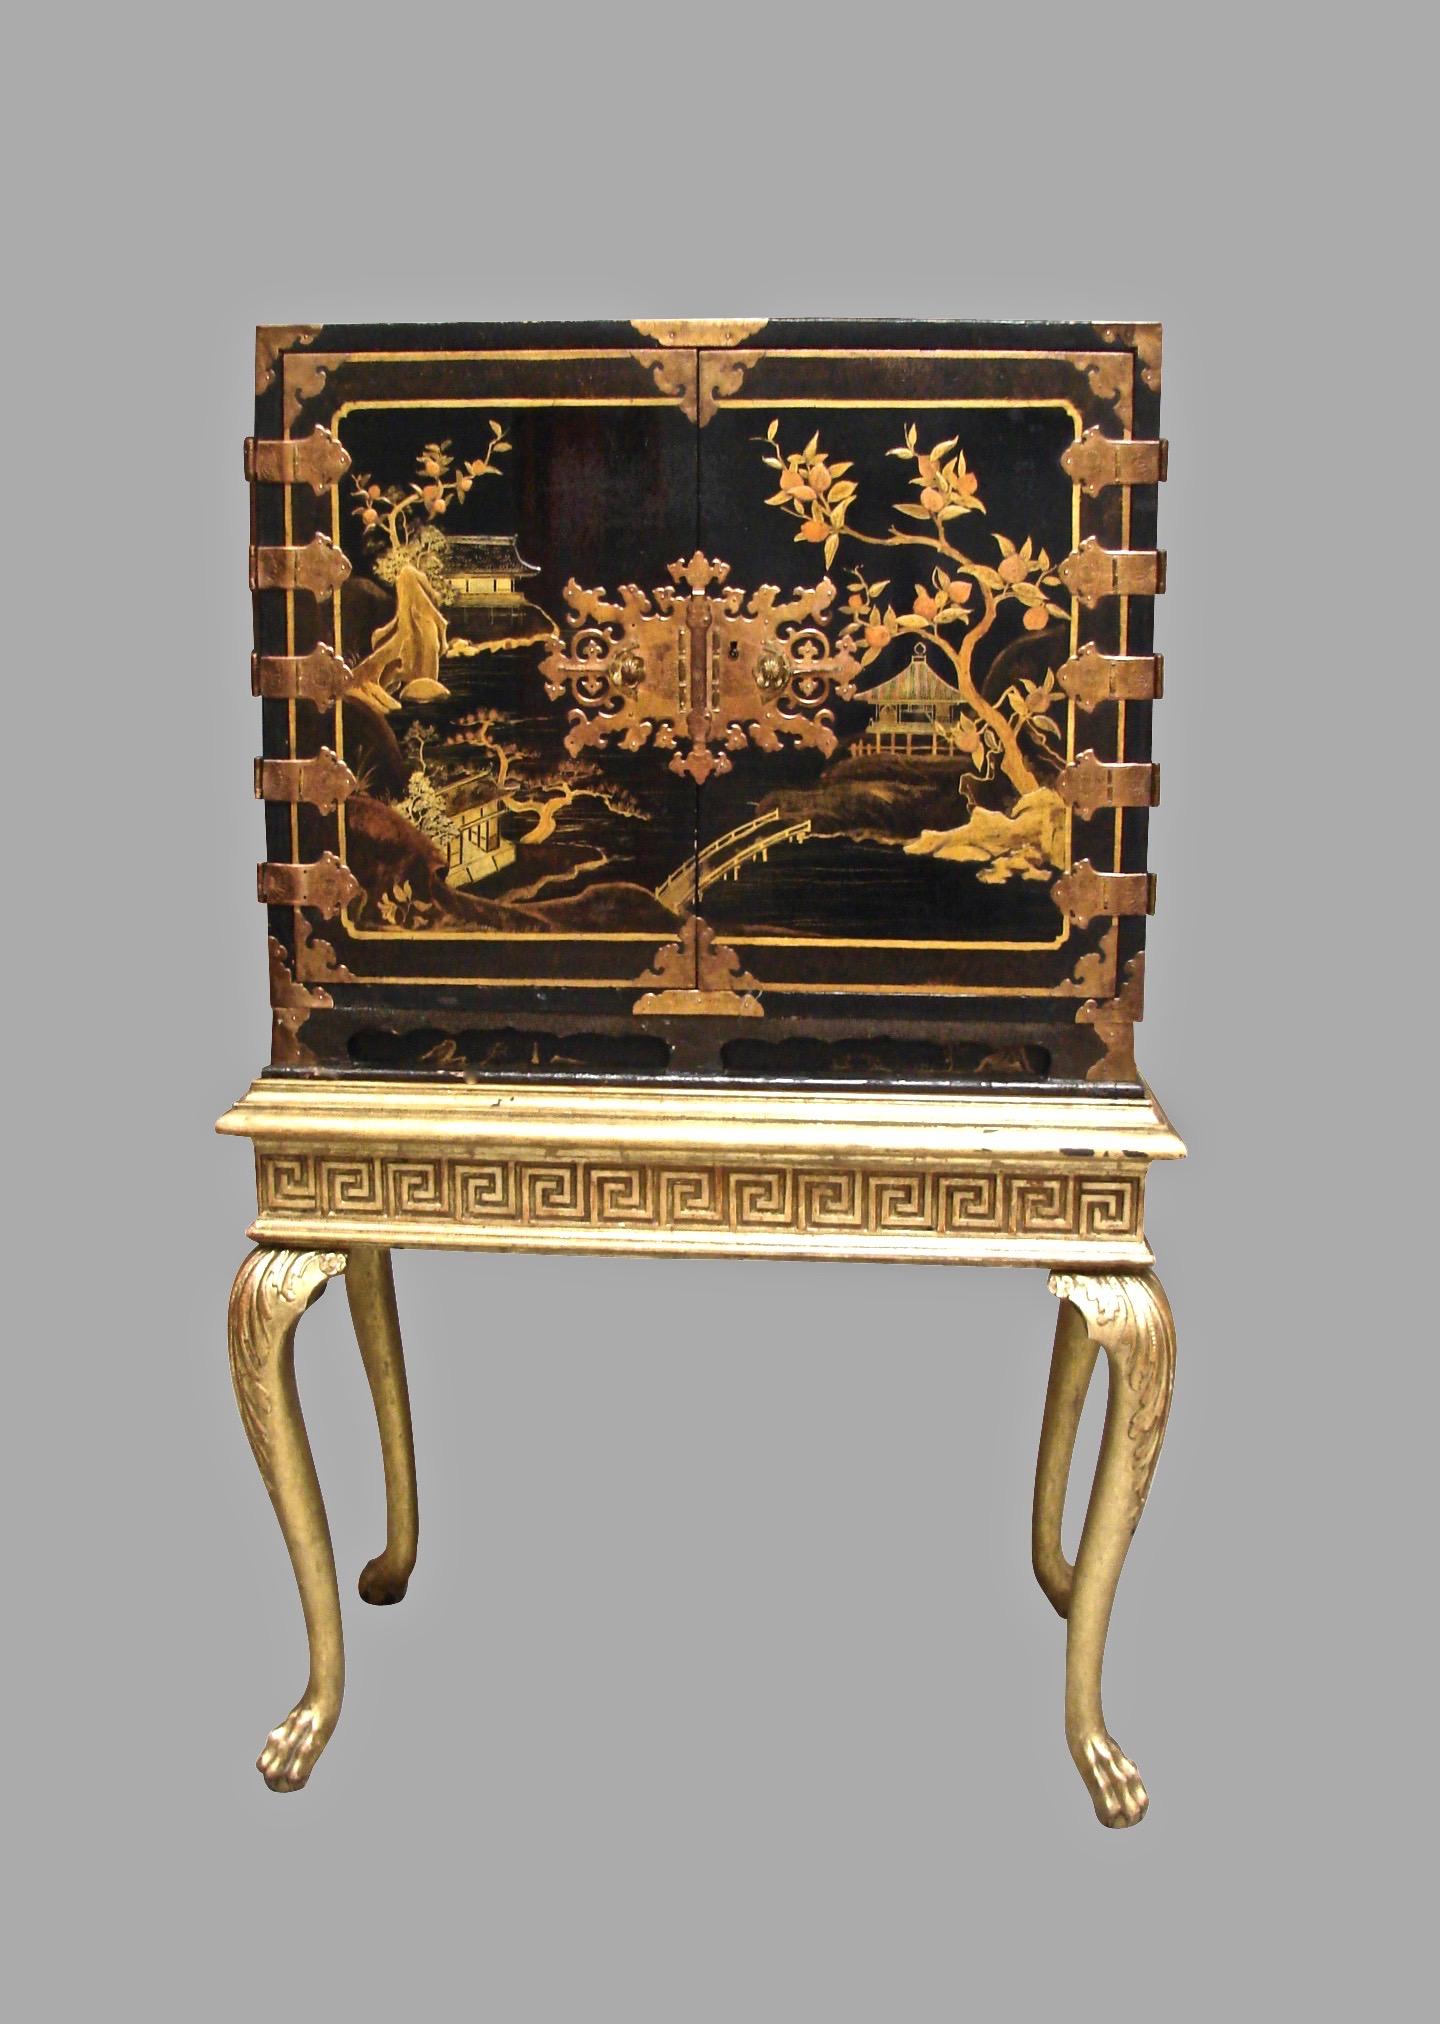 A Japanese export Edo period (1603-1868) black and gold lacquer cabinet decorated with traditional Japanese houses surrounded by trees and a bridge, the doors with elaborately engraved hinges and an ornate central lock. The interior is fitted with